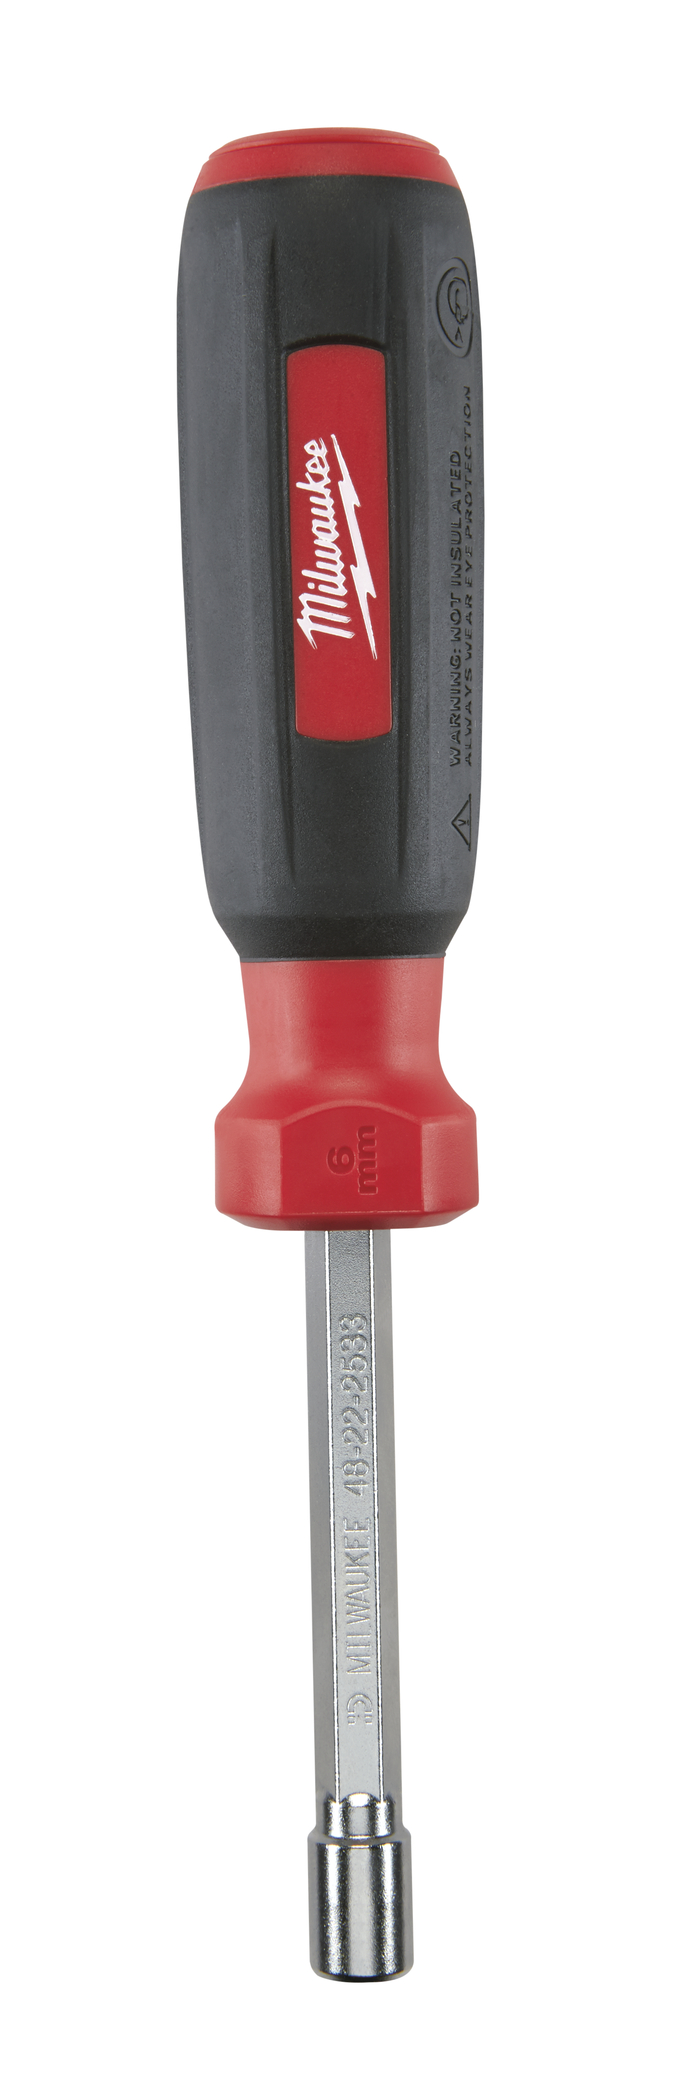 6 mm HollowCore Magnetic Nut Driver